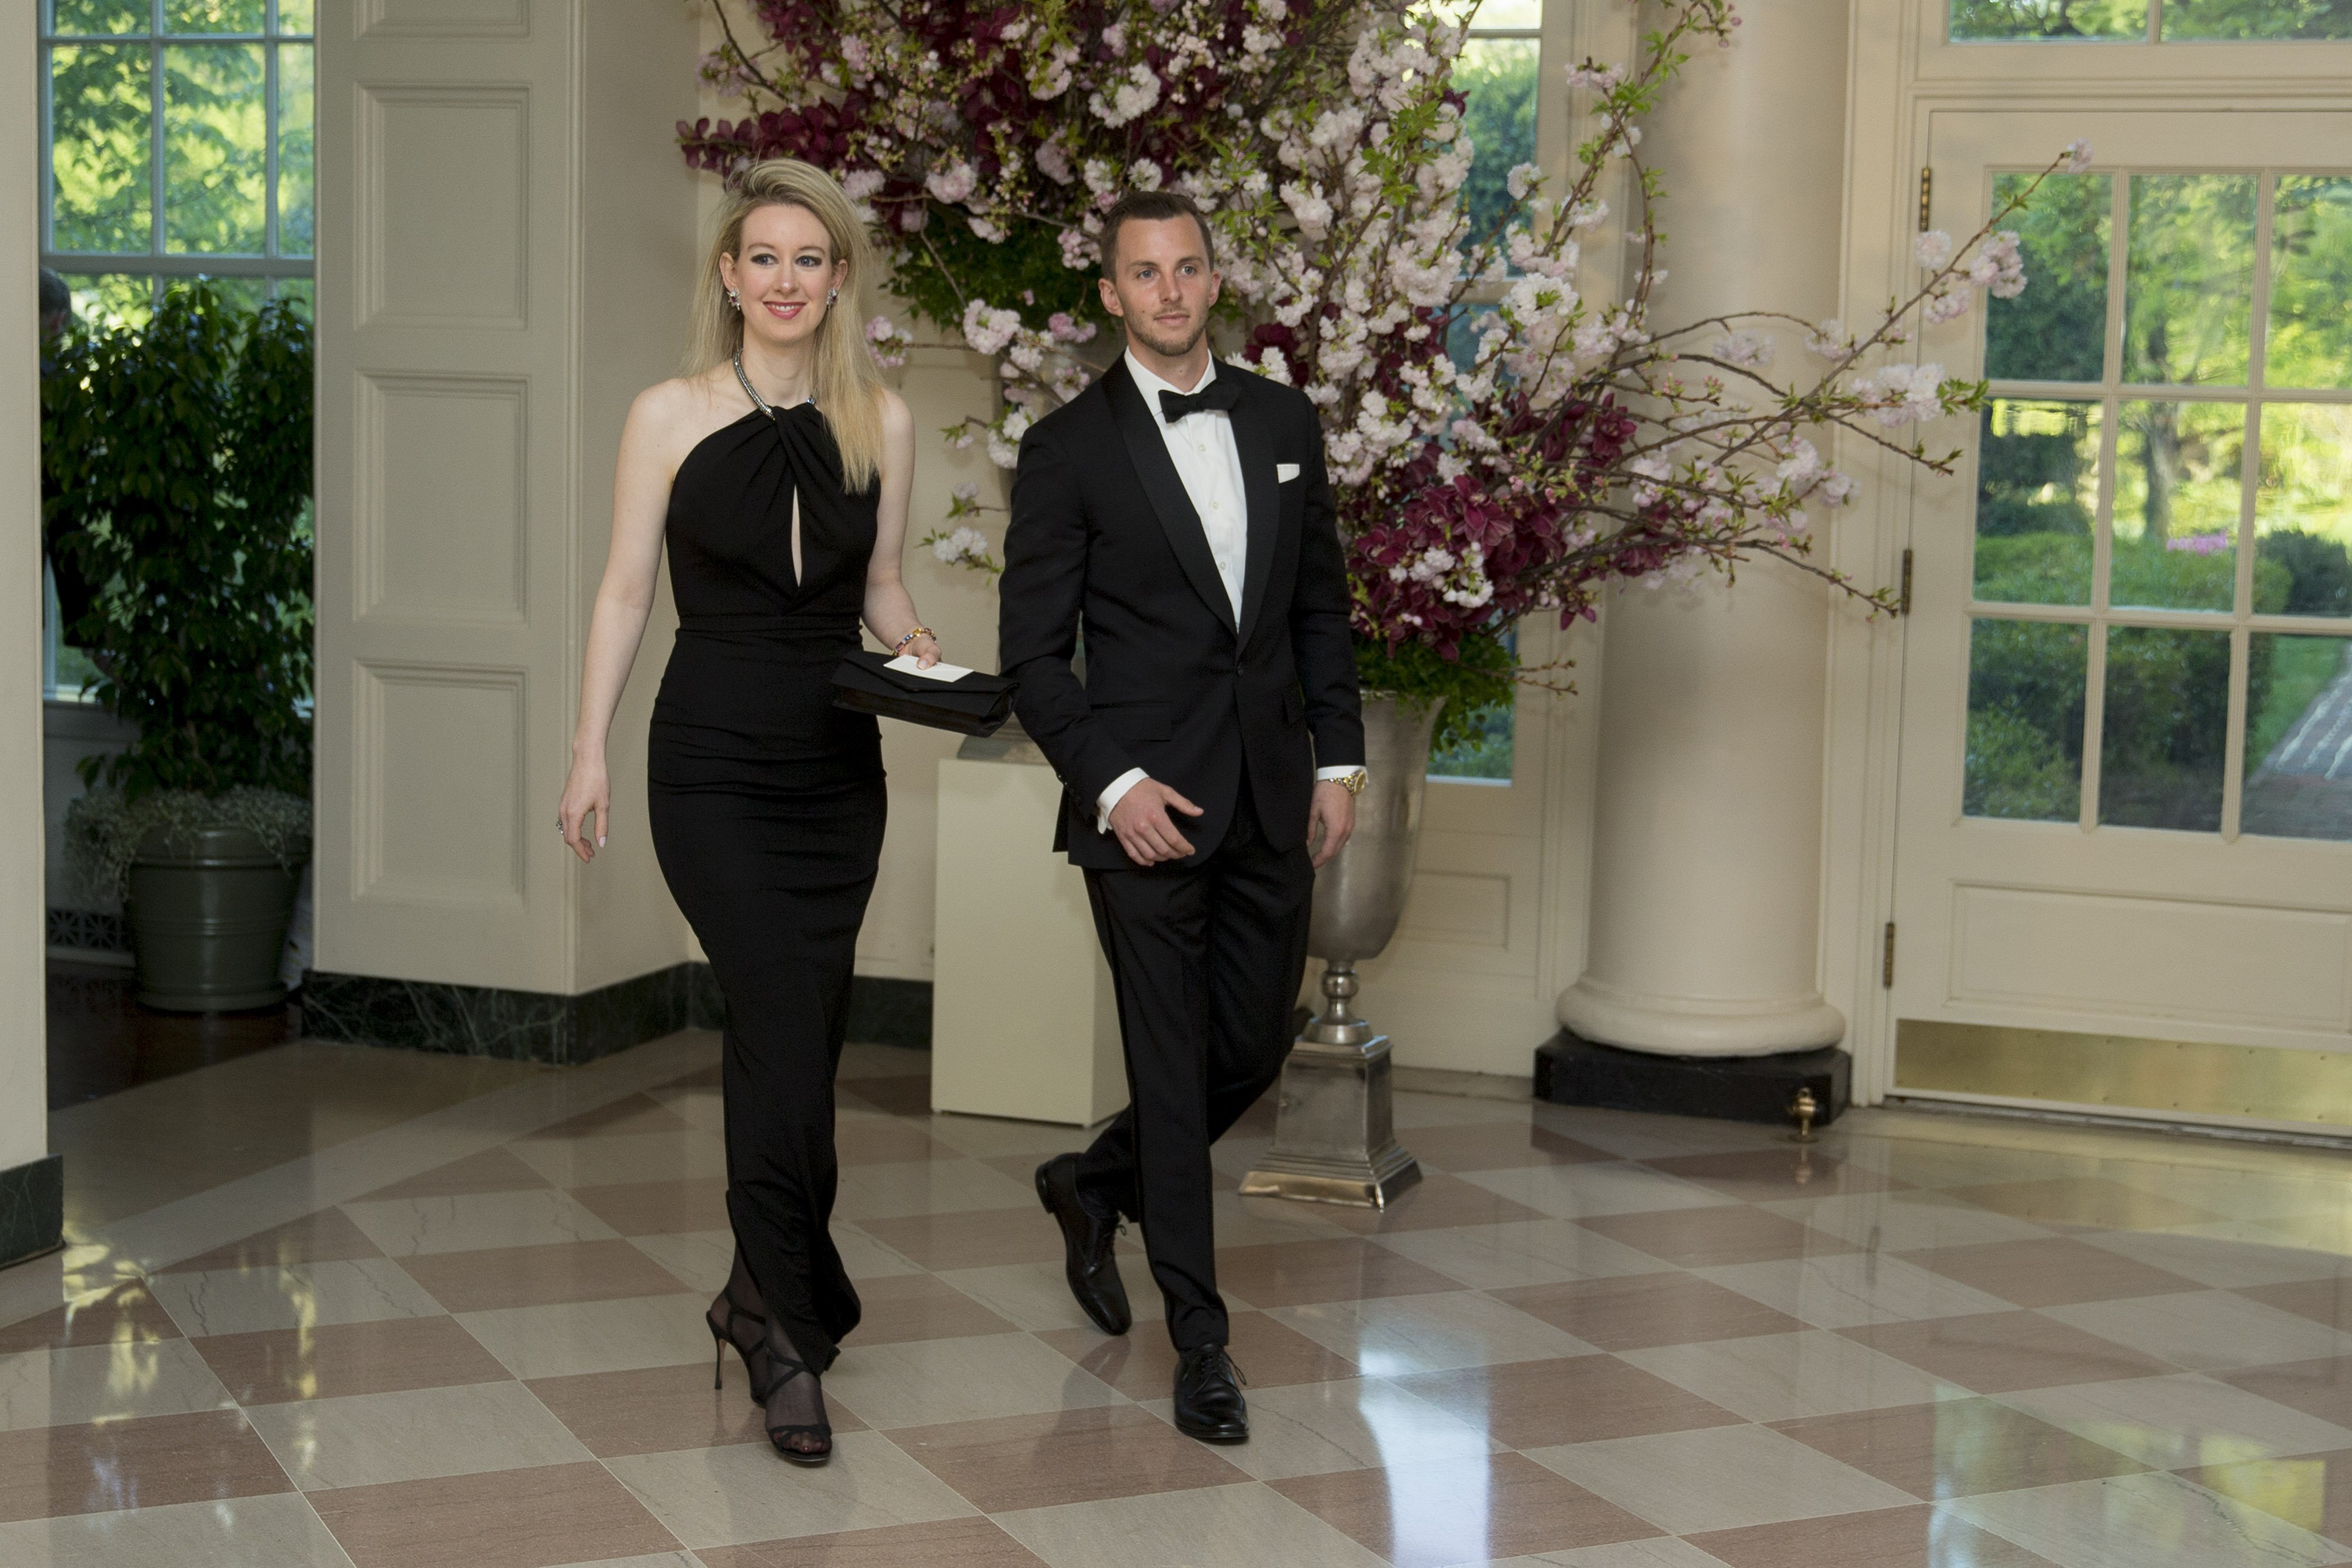 Elizabeth Holmes and Christian Holmes arrive at a state dinner at the White House in Washington, D.C, on Tuesday, April 28, 2015. | Source: Getty Images